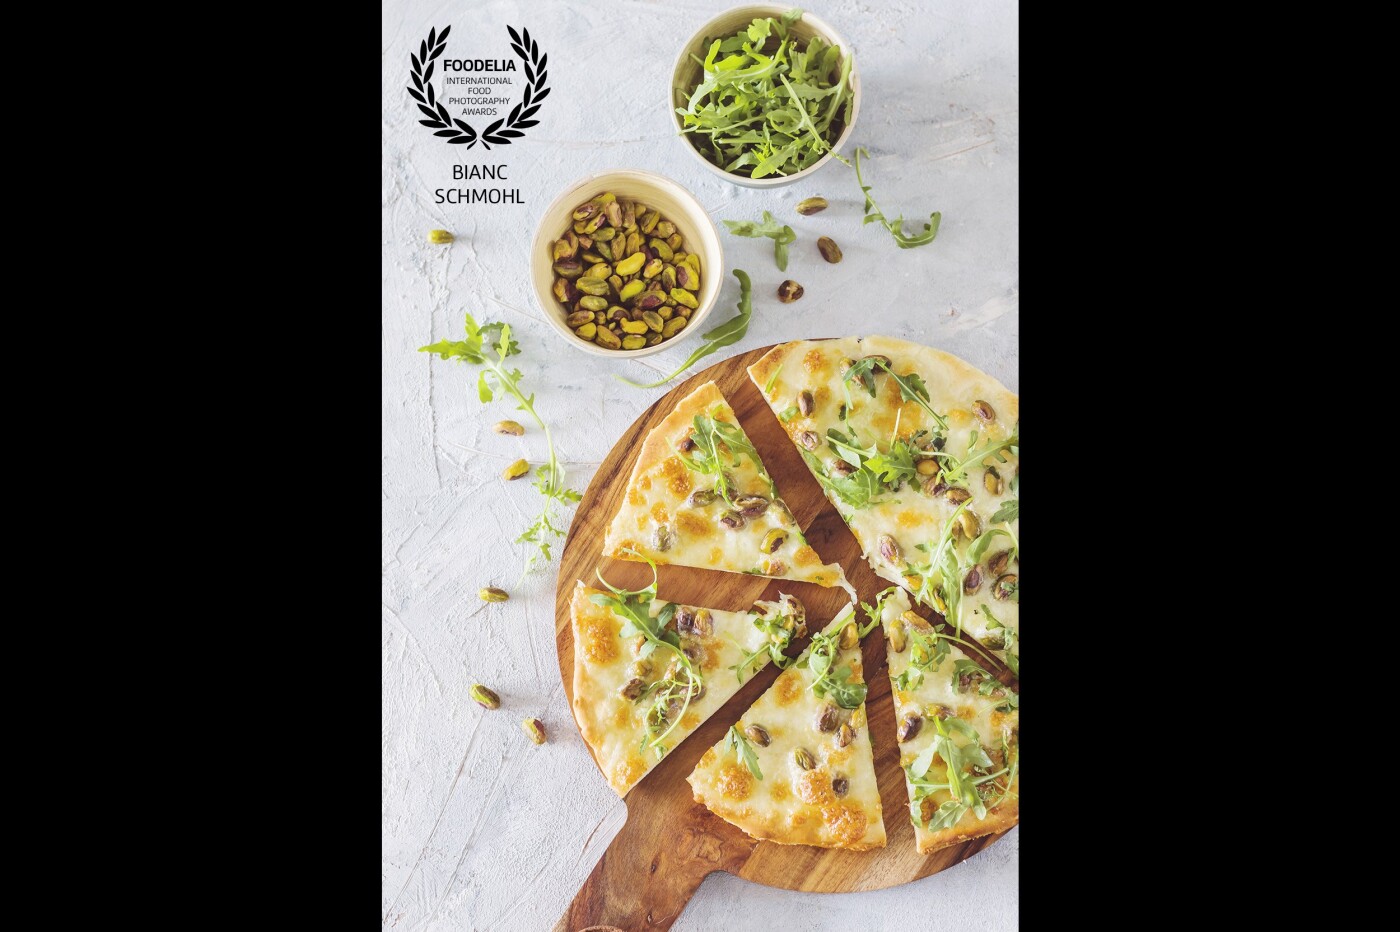 Easy pizza. After all, the Italian kitchen is all about simplicity, flavor and the best ingredients. This pizza topping contains only 3 ingredients: mozzarella, pistachios, and arugula. Simply tasteful and a wonderful piece to shoot ‘flat lay’.